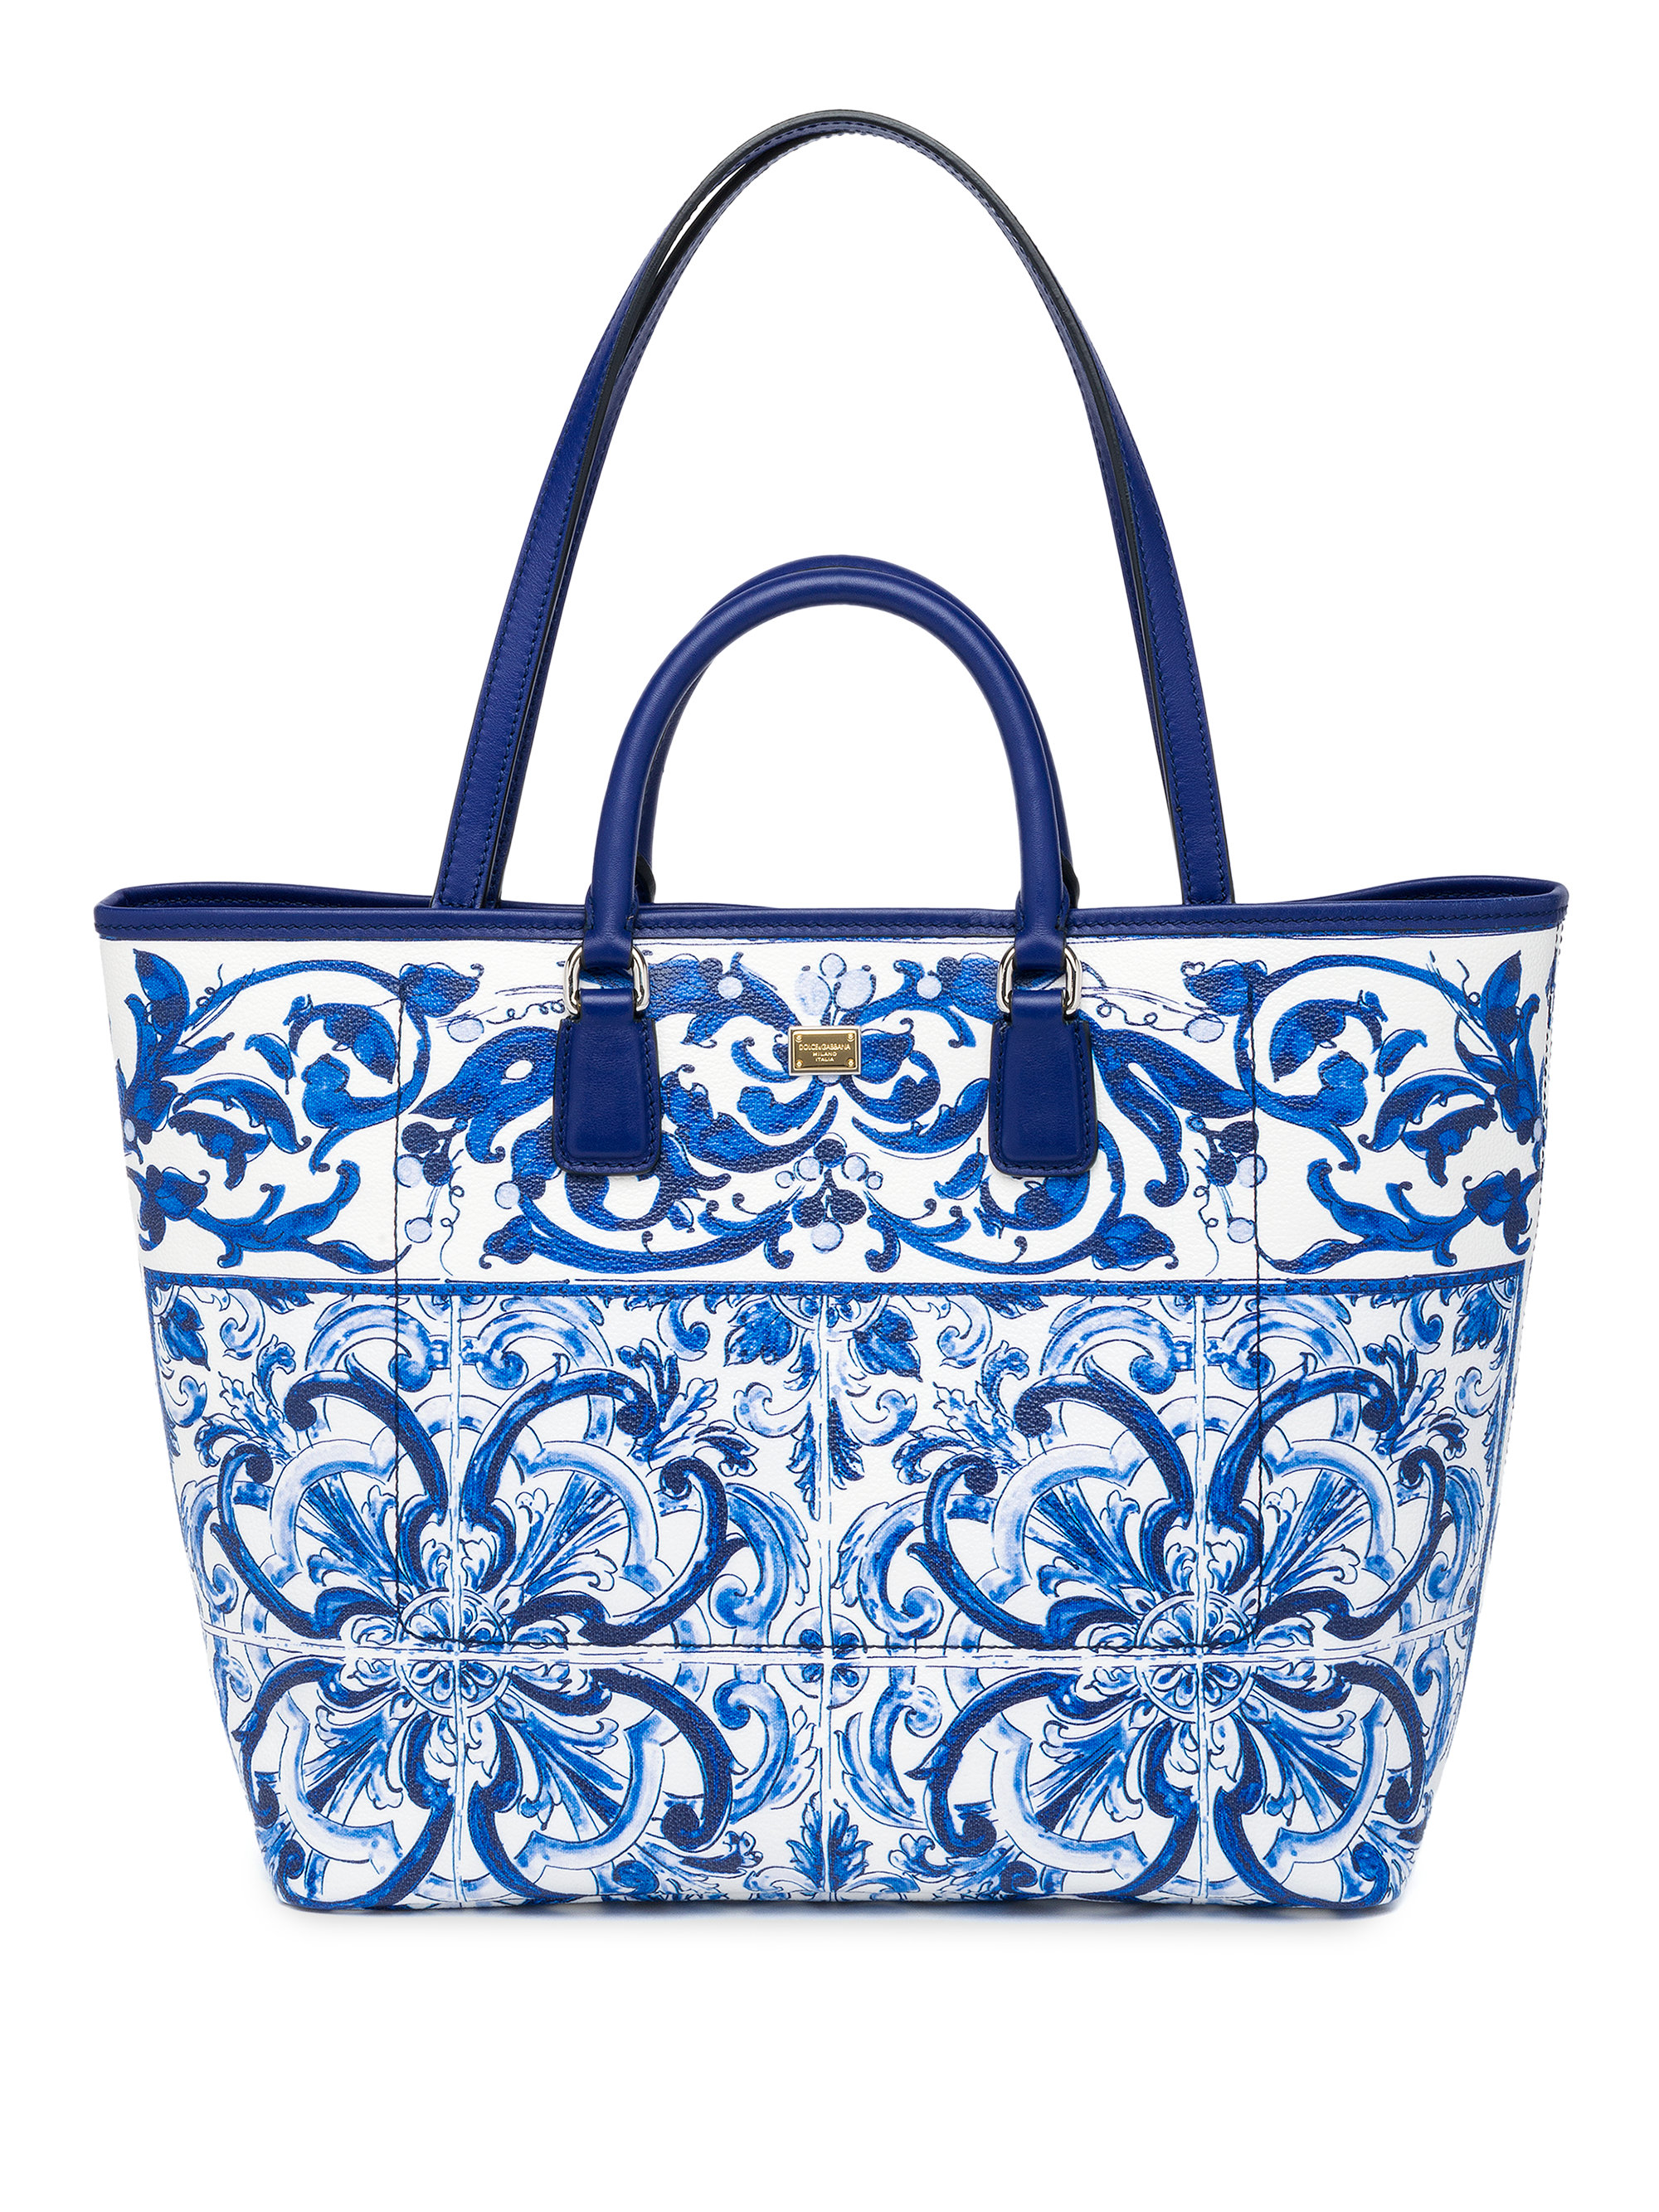 Dolce & Gabbana Italian Tile Coated Canvas Tote in Blue - Lyst